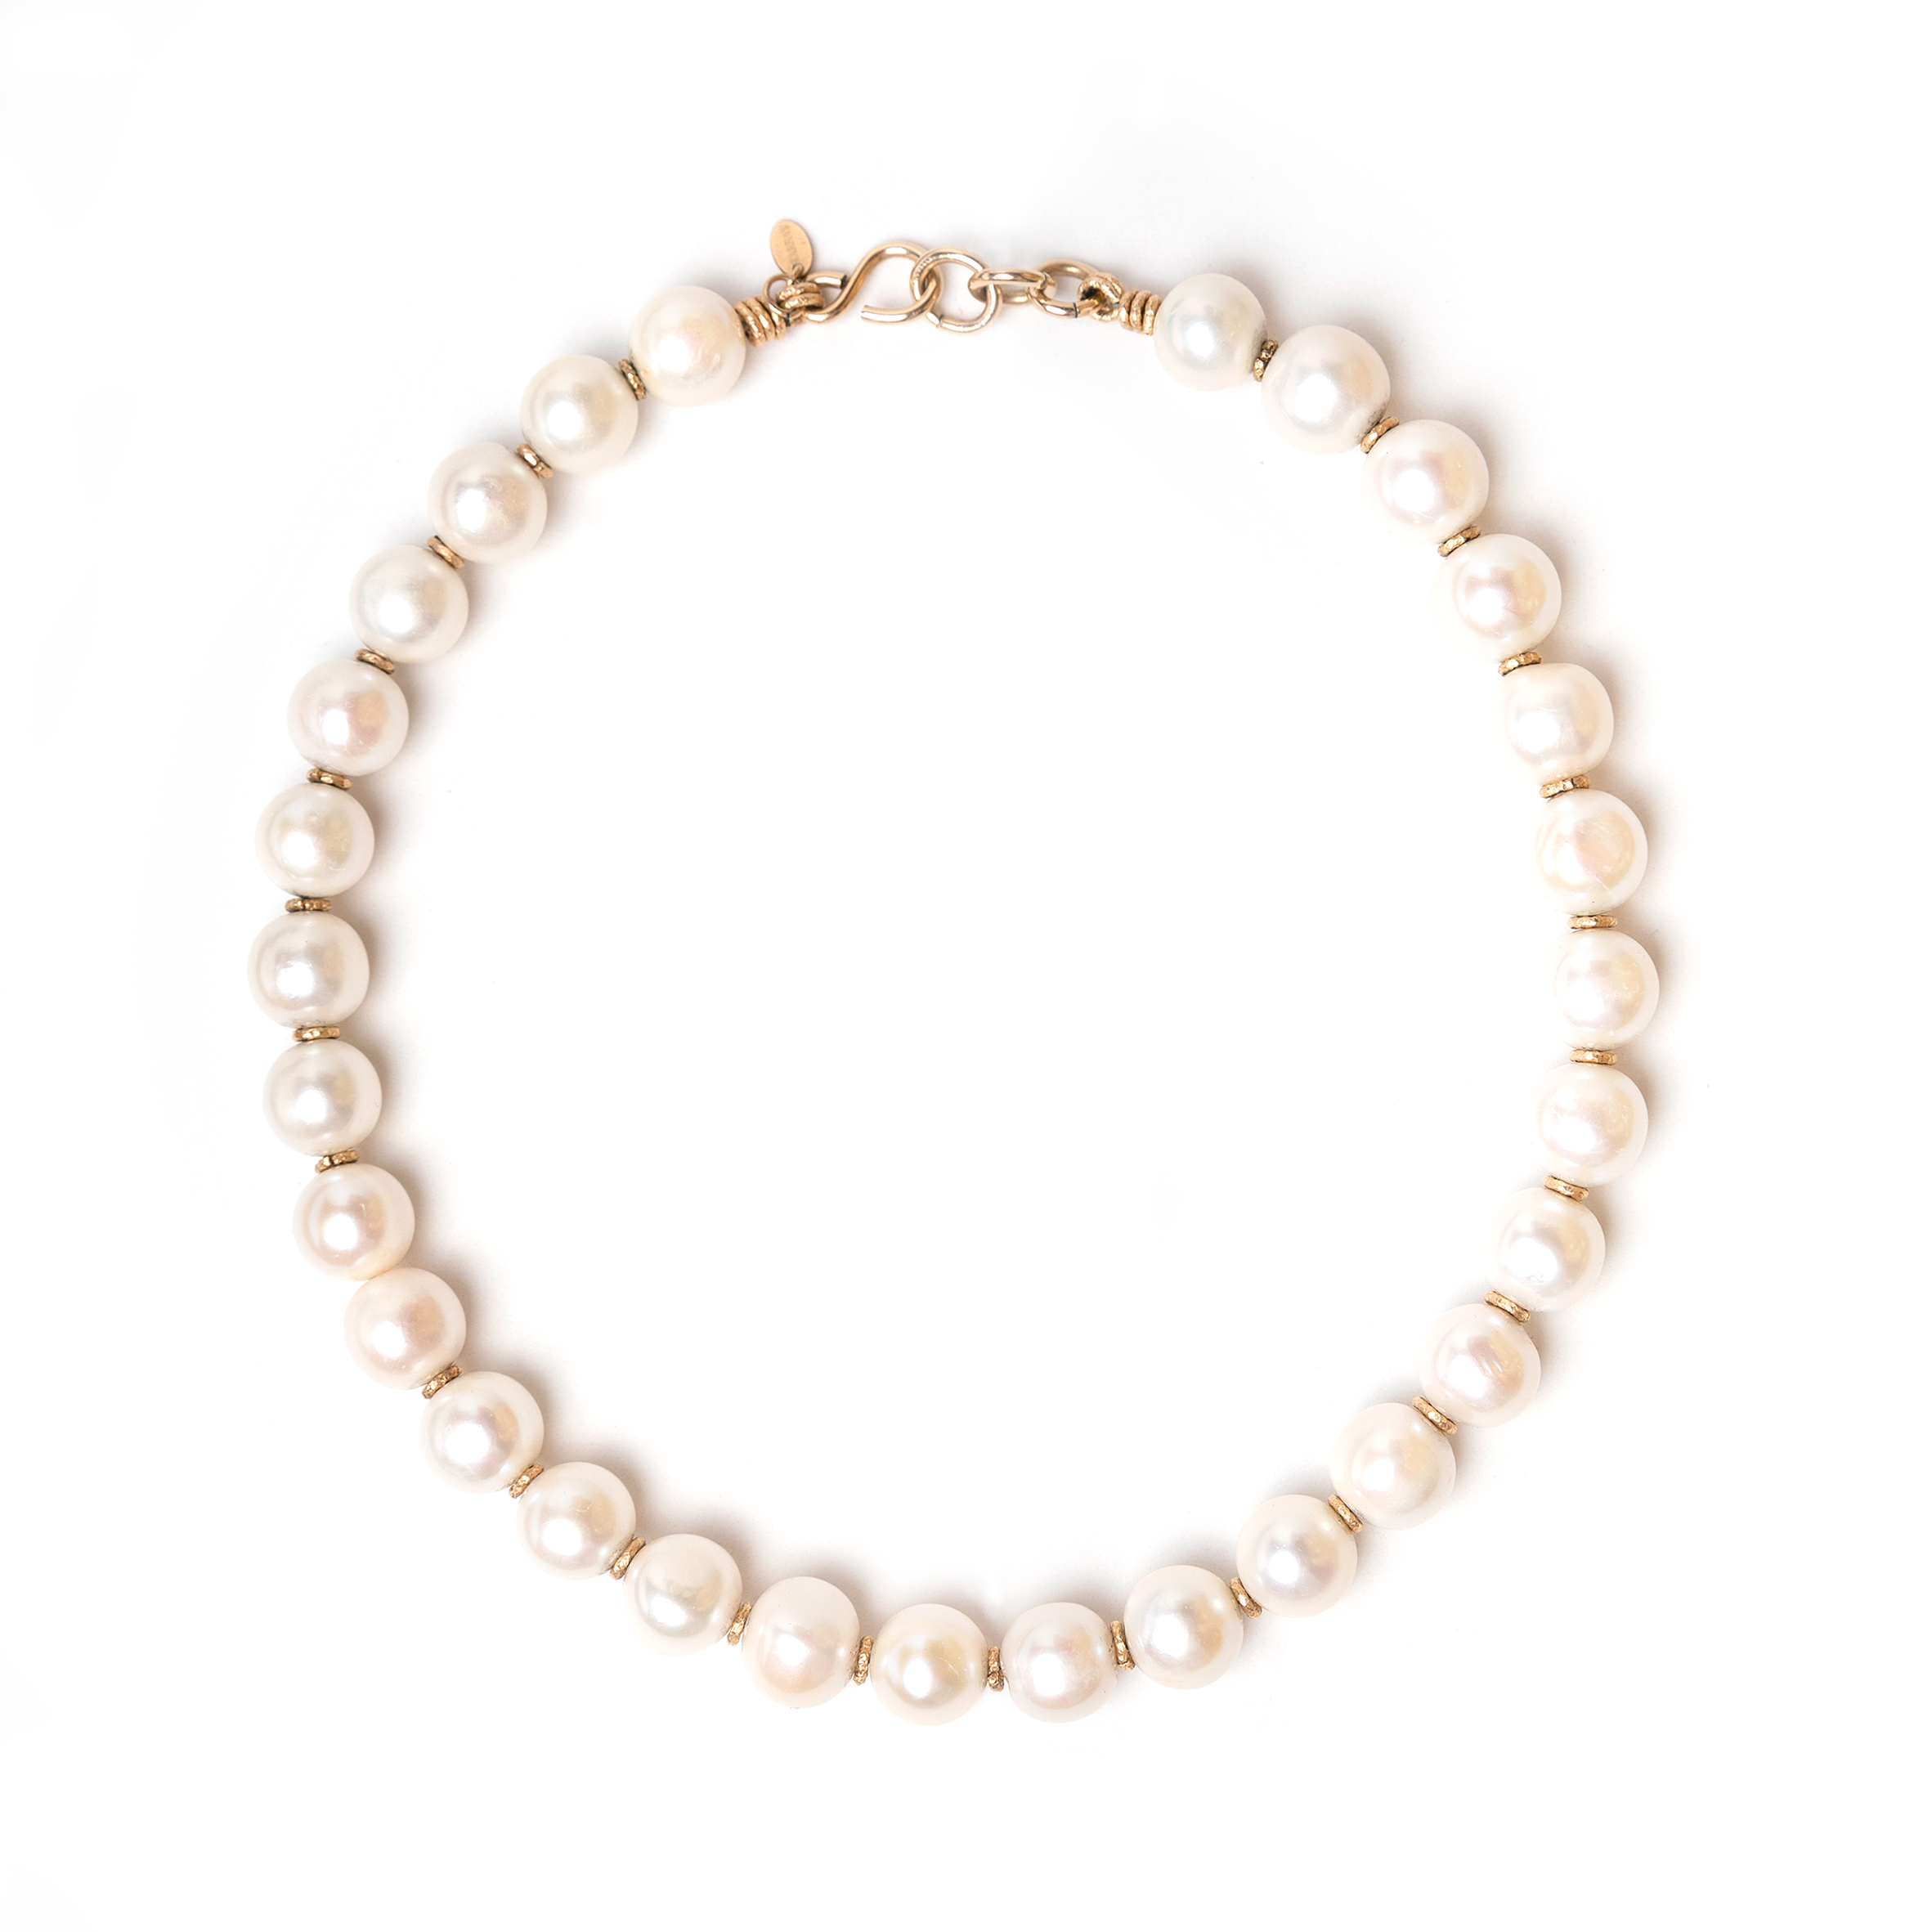 Cubagua Necklace - Pearl Necklaces TARBAY   